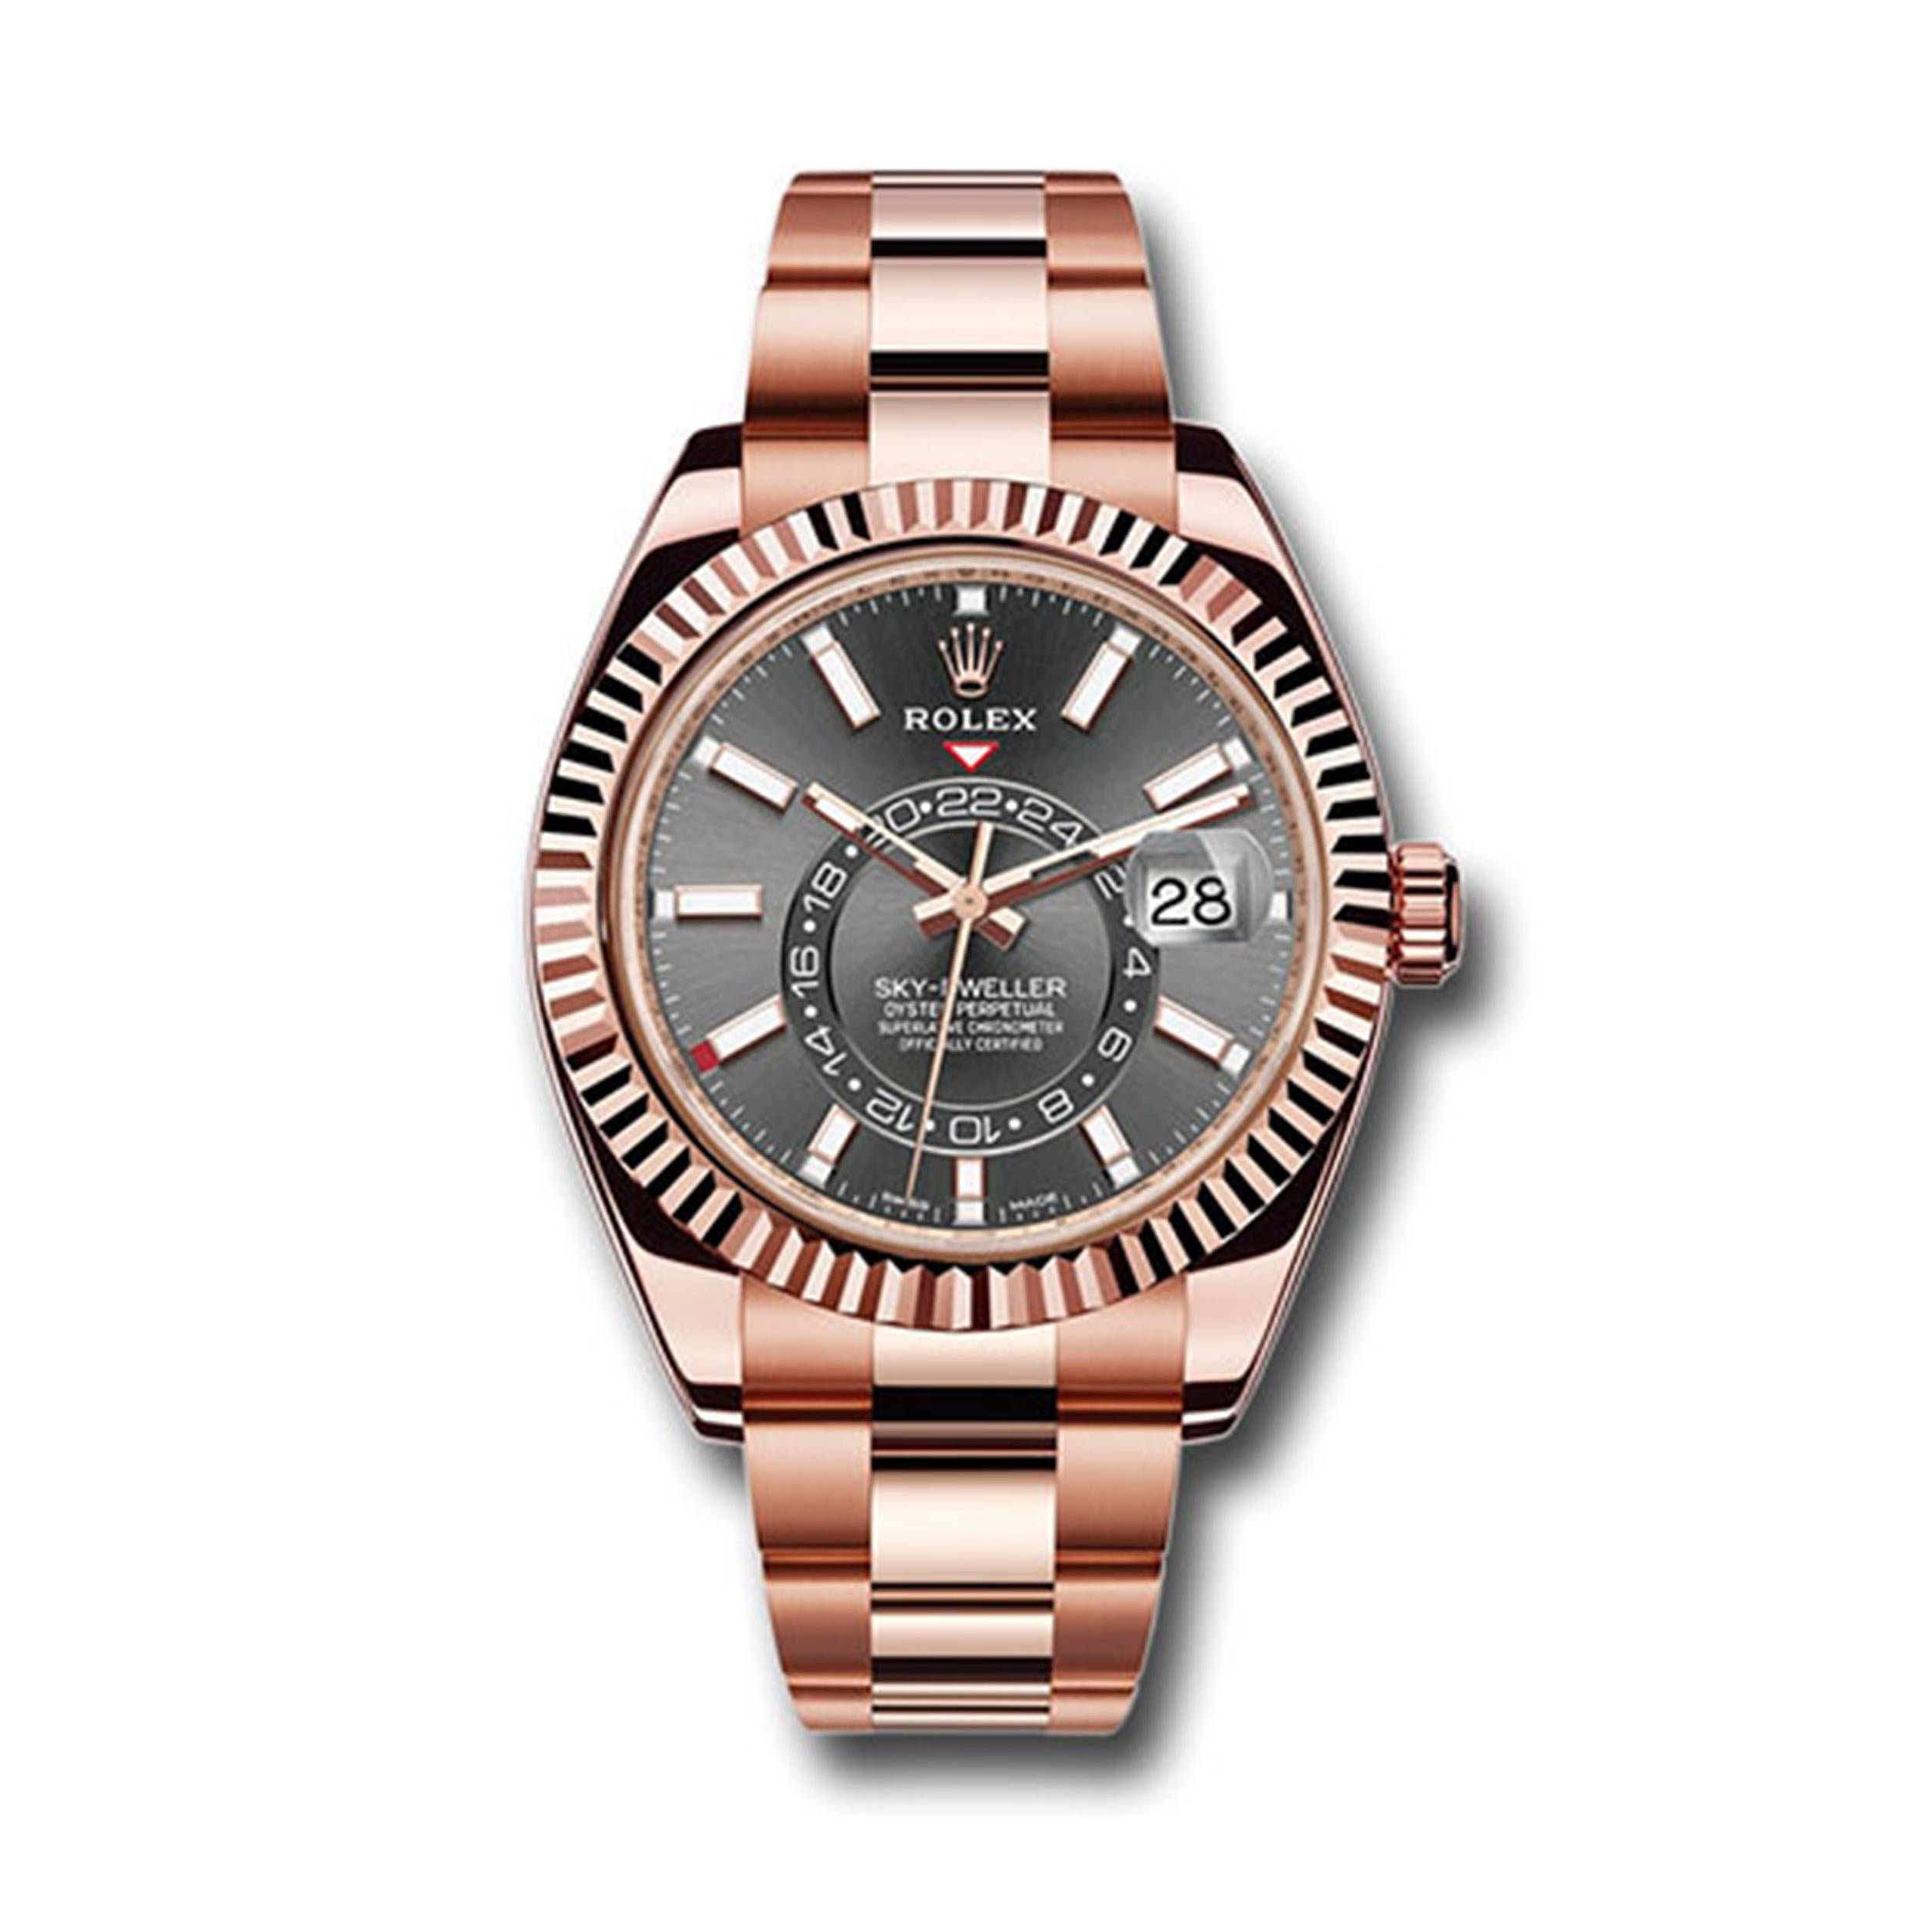 This brand new Rolex Sky Dweller 326935 dkr is a beautiful men's timepiece that is powered by an automatic movement which is cased in a rose gold case. It has a round shape face, date, gold case dial and has hand sticks style markers. It is